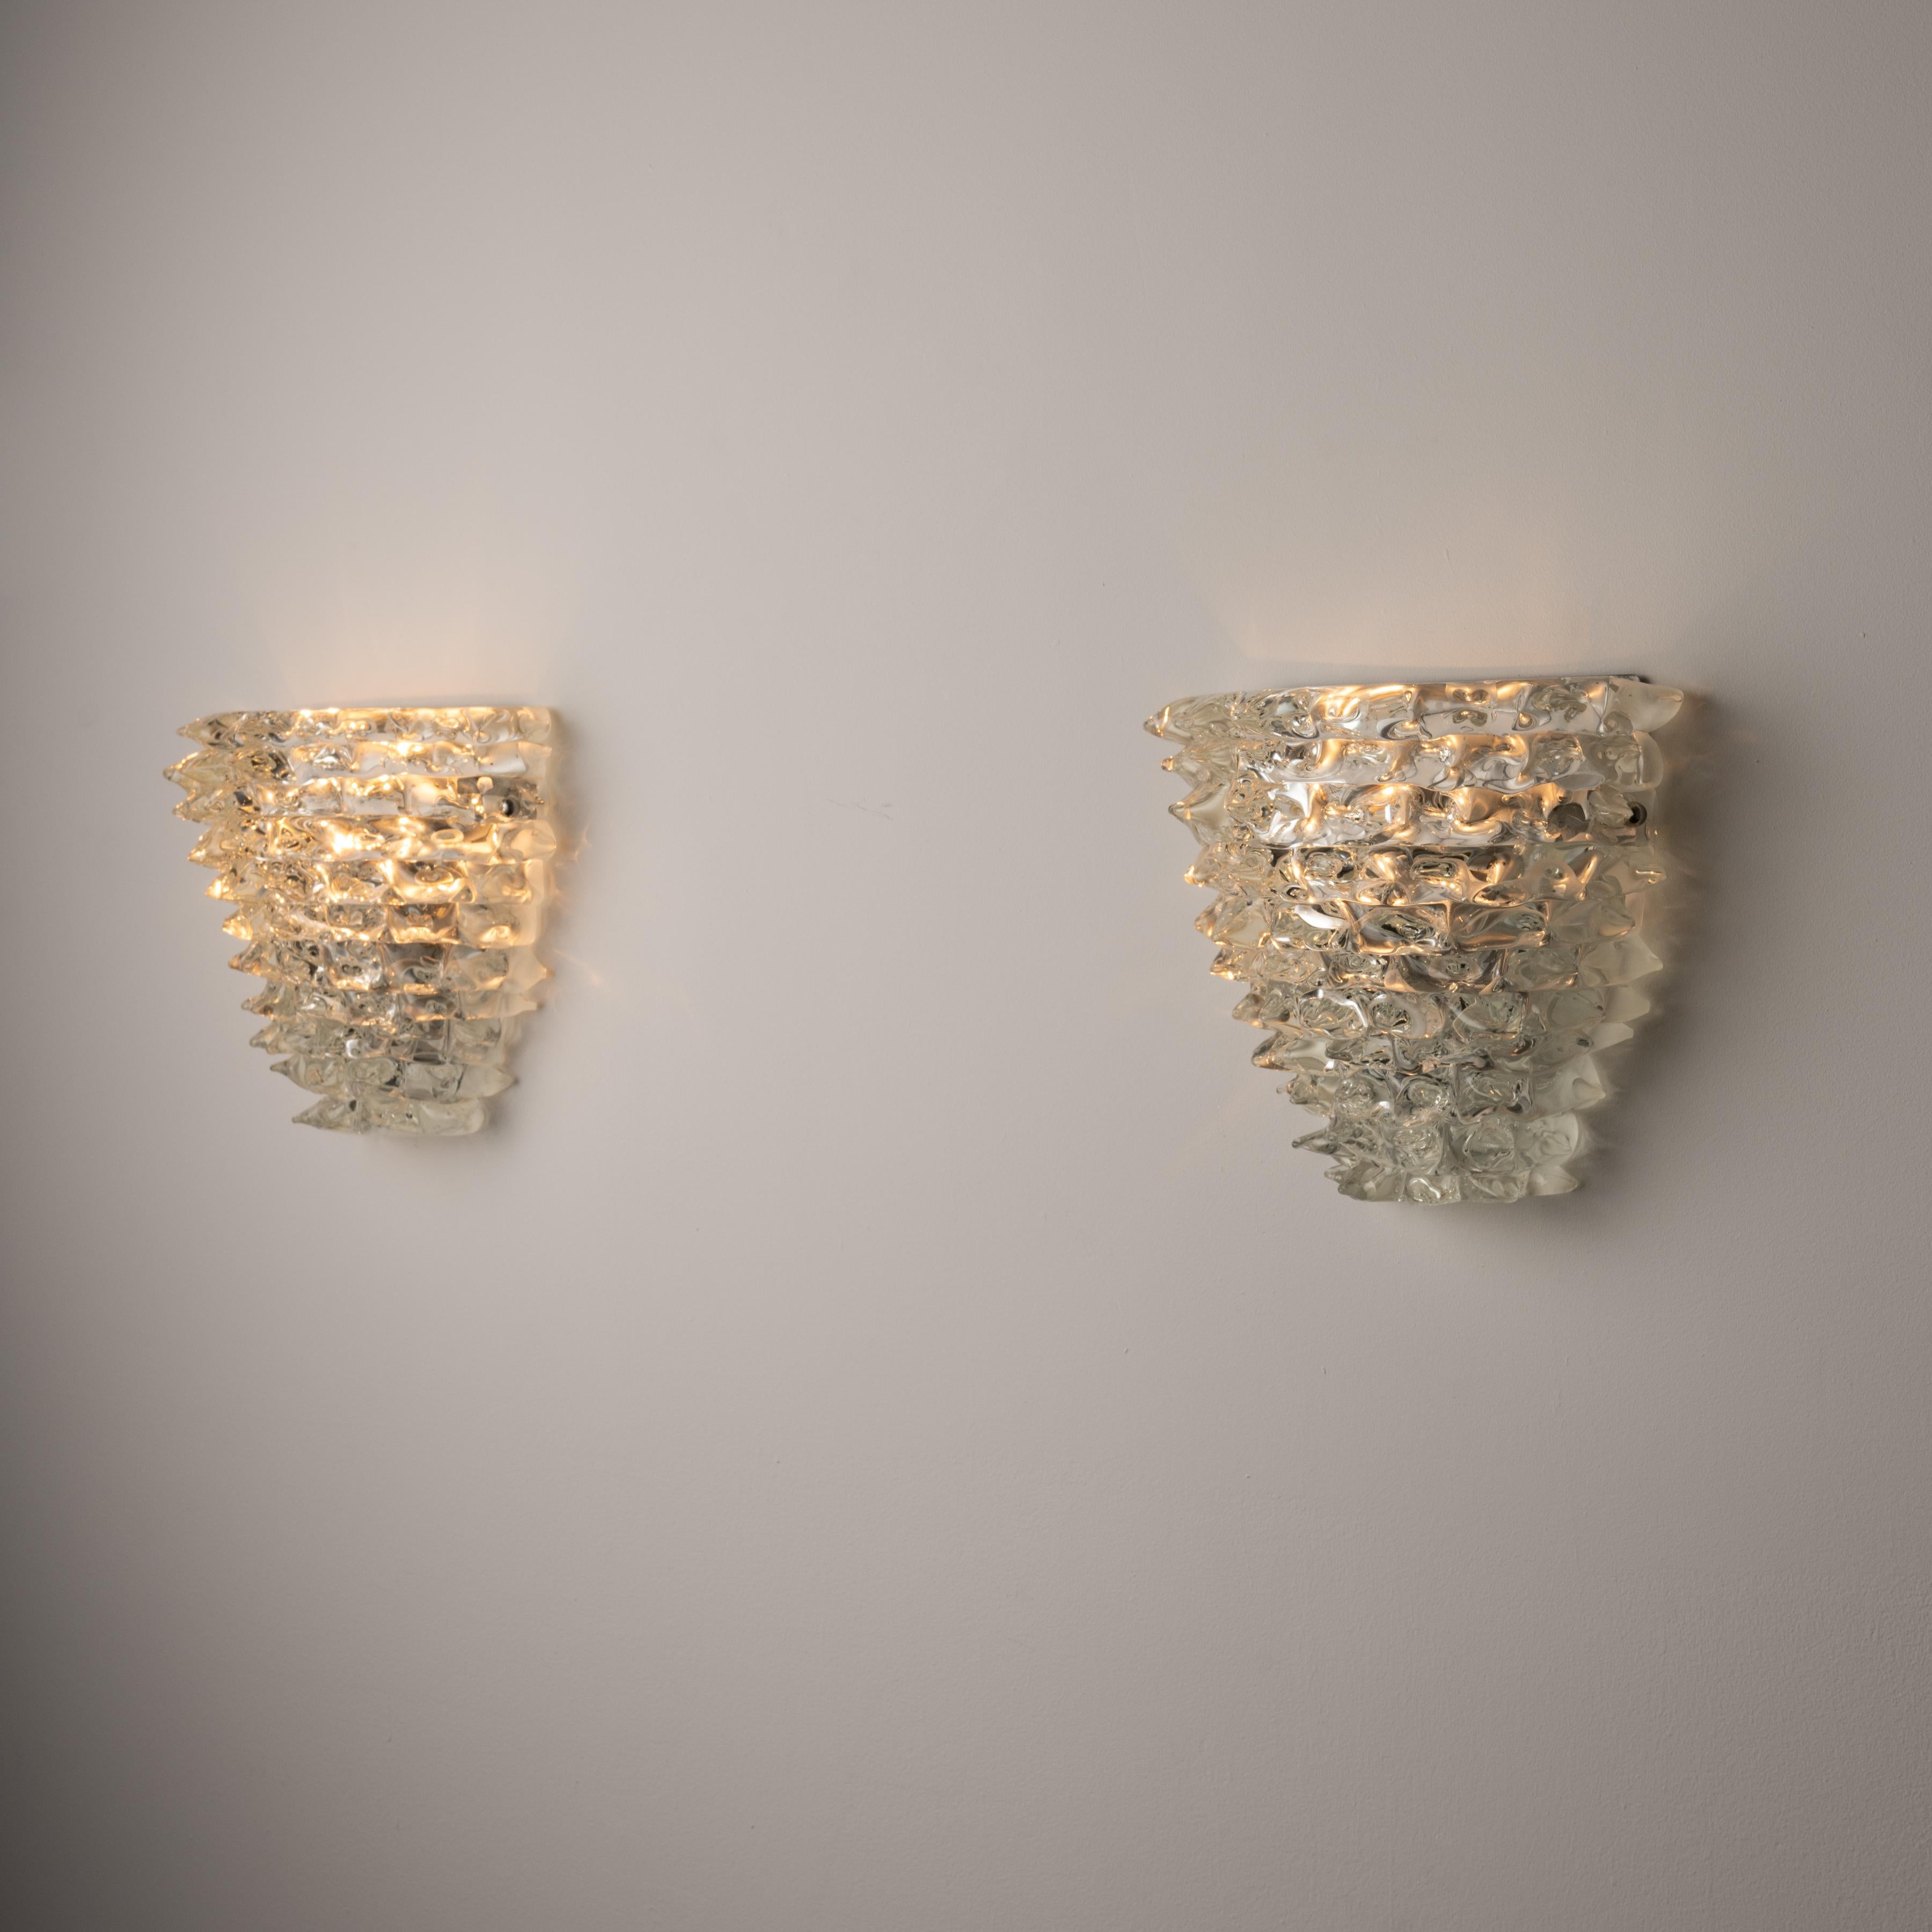 Barovier and Toso Murano Glass Sconces. Designed and manufactured in Italy, circa the 1940s. All Murano glass comprising of rounded formed spikes throughout the entire exposed structure. The lamp comprises of two E14 socket types, adapted for the